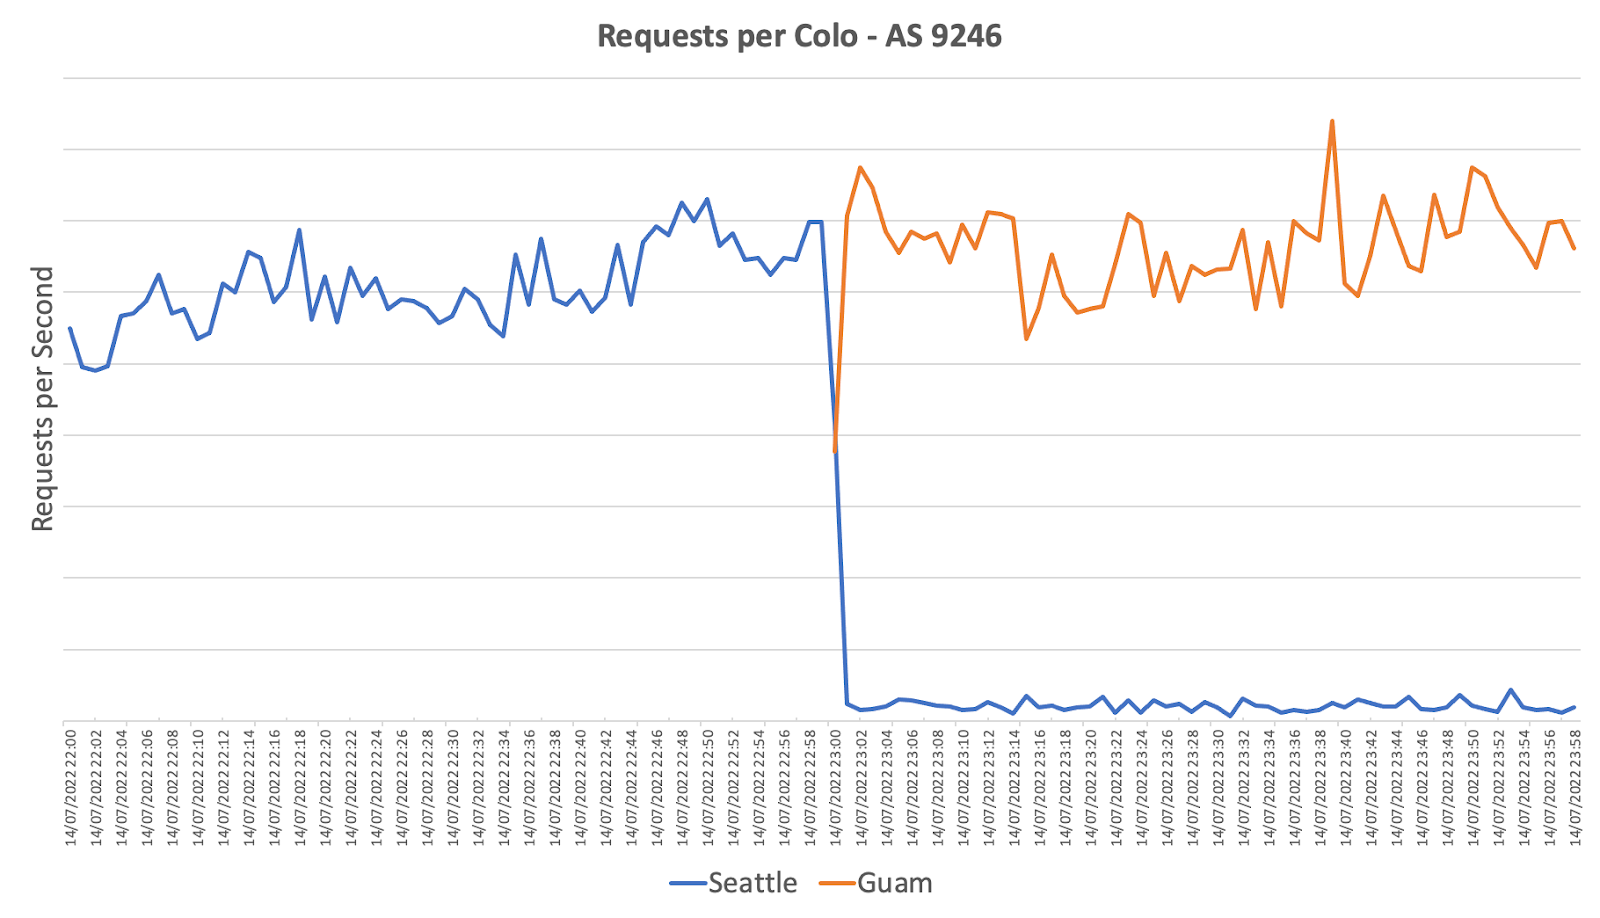 Figure 3: Requests per Colo for AS 9246 Before vs After Cloudflare Deployment at Guam.